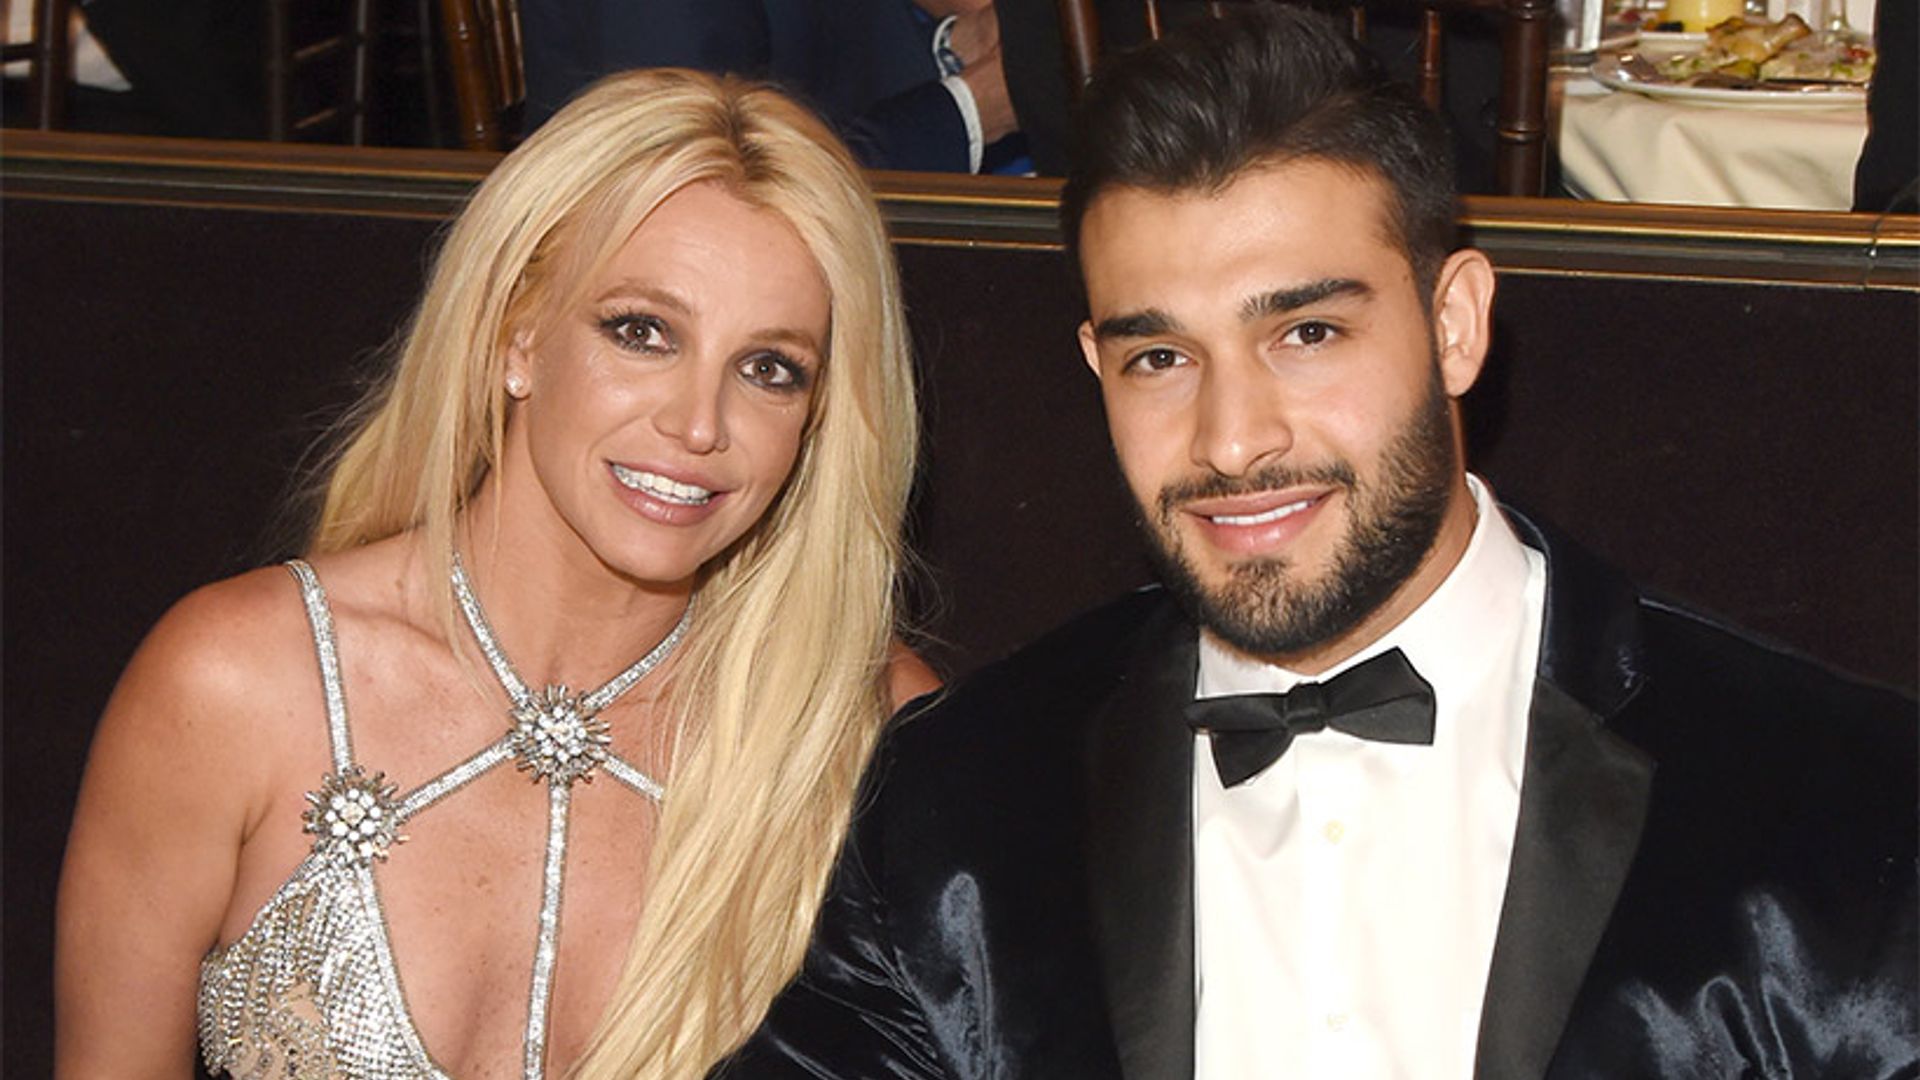 Britney Spears and boyfriend Sam Asghari's couples workout is SERIOUSLY impressive